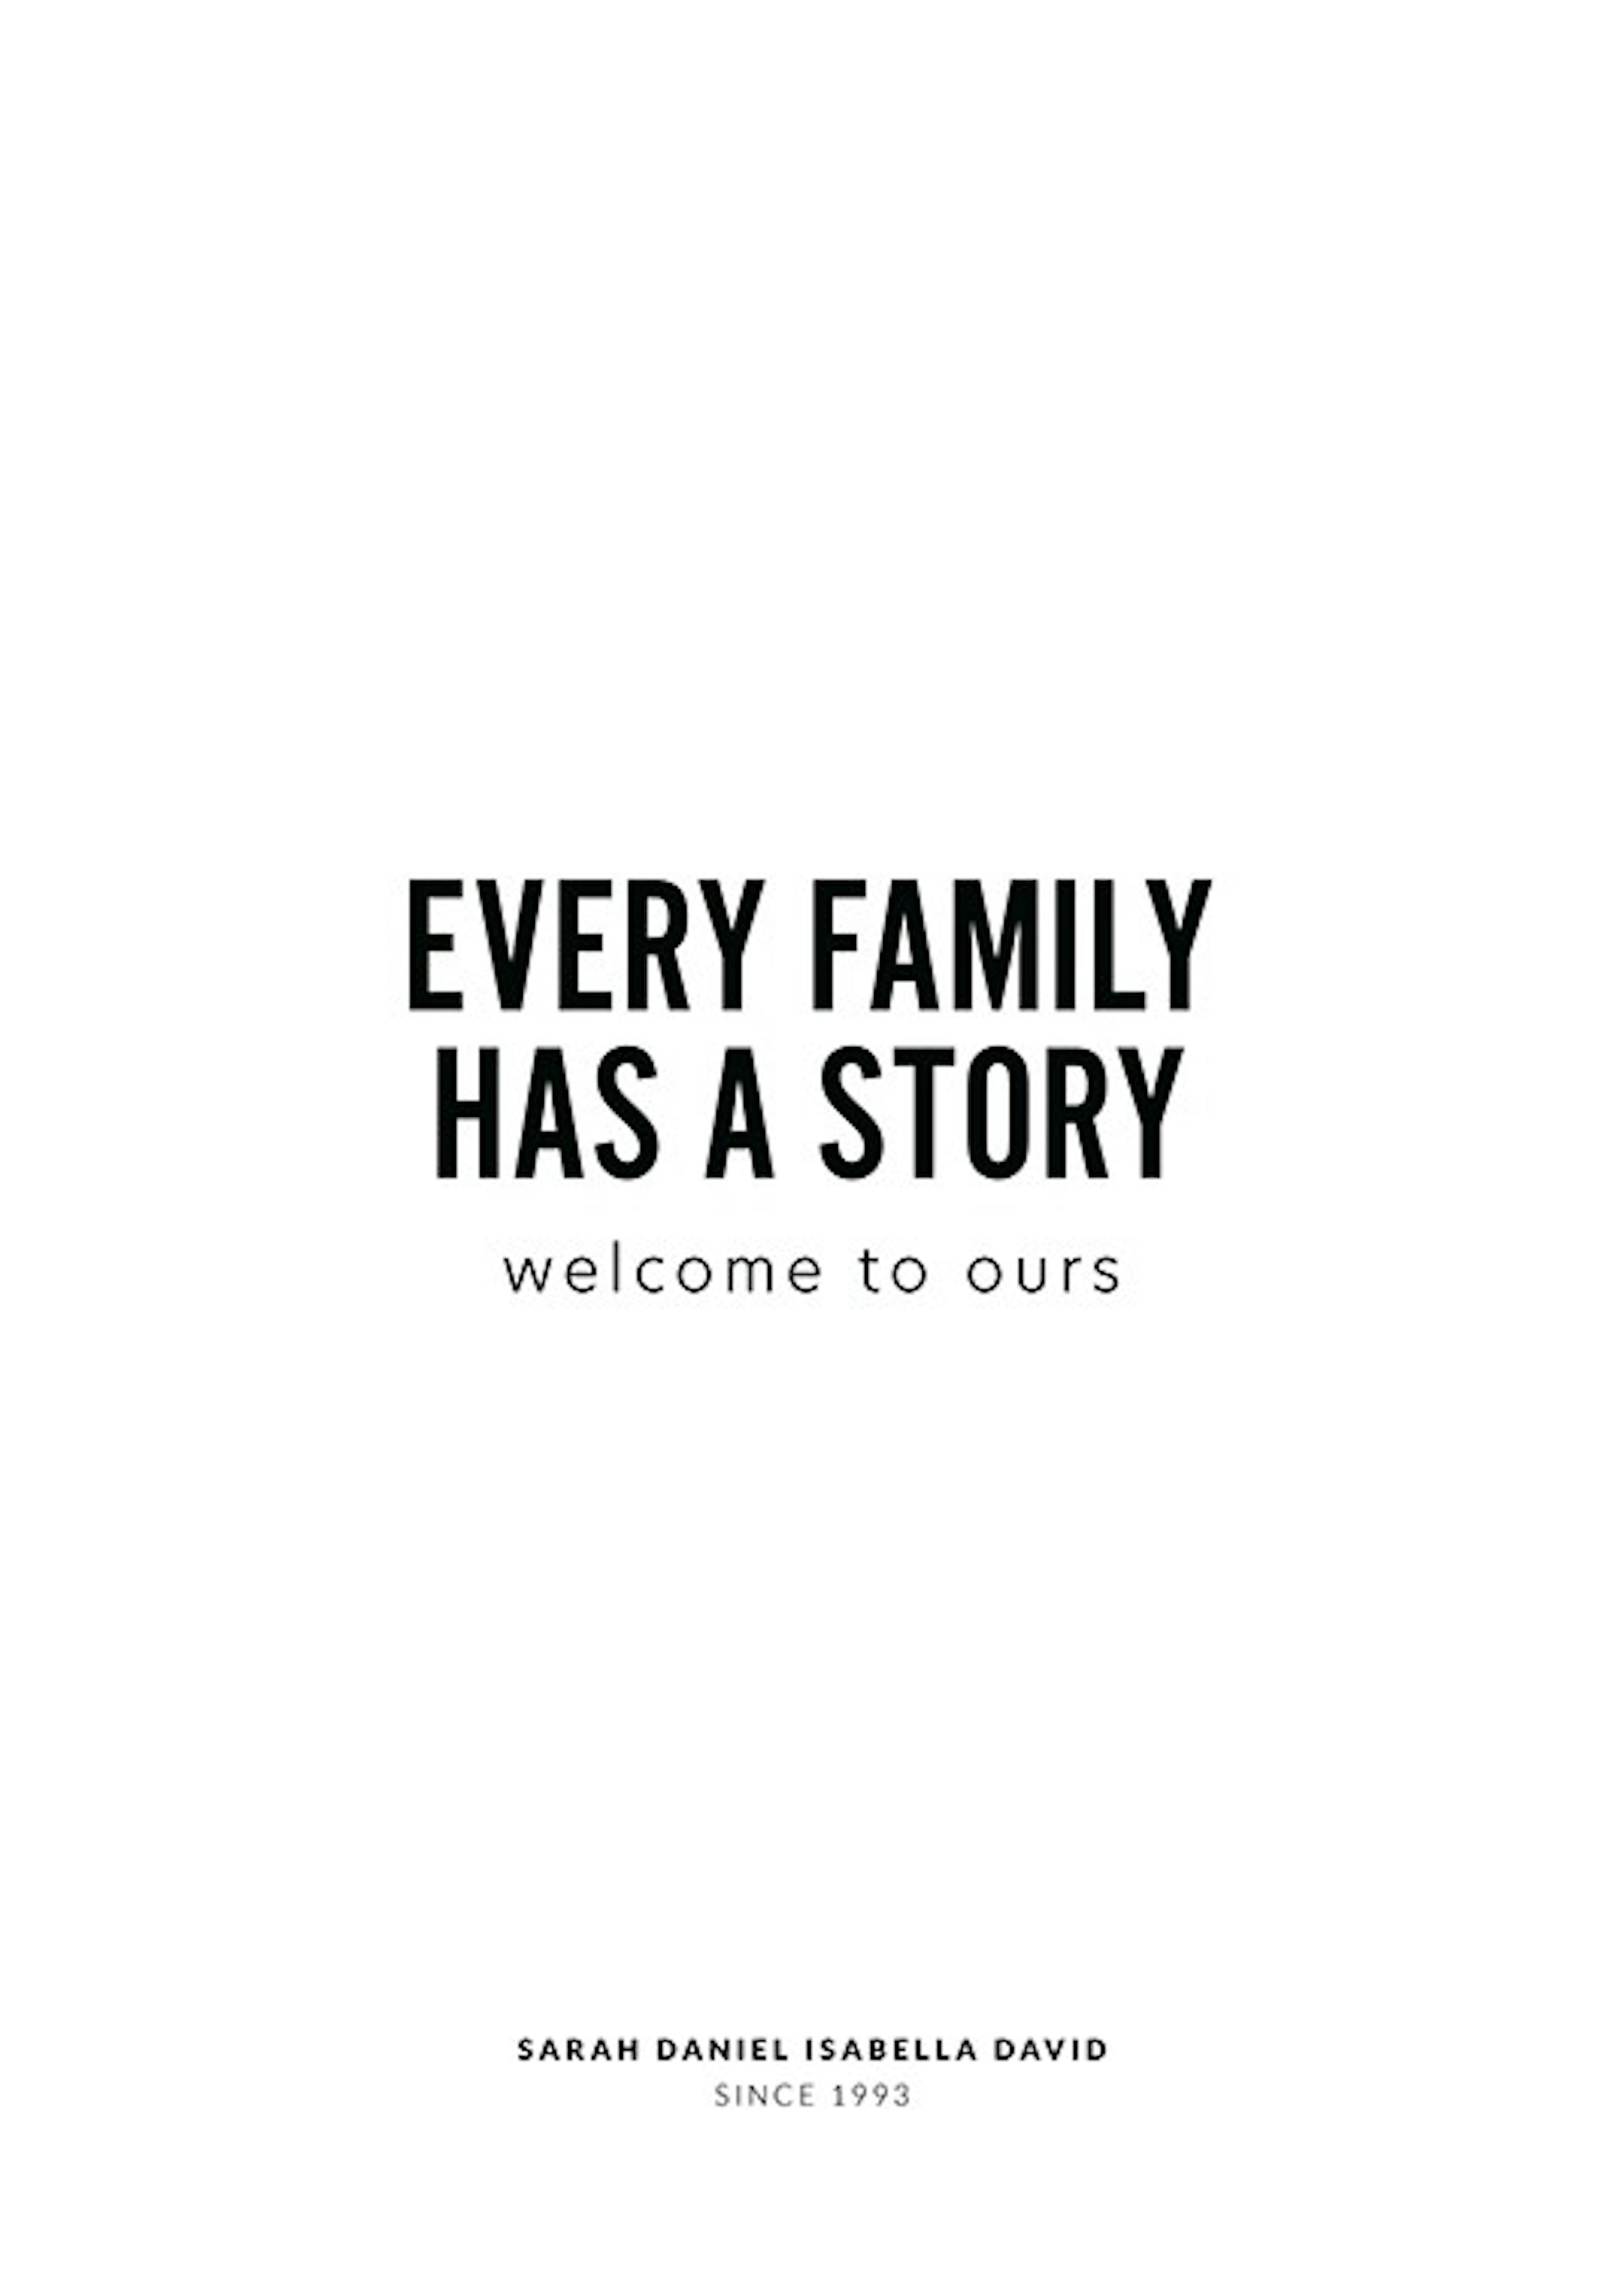 Family Story No1 Personal Poster 0